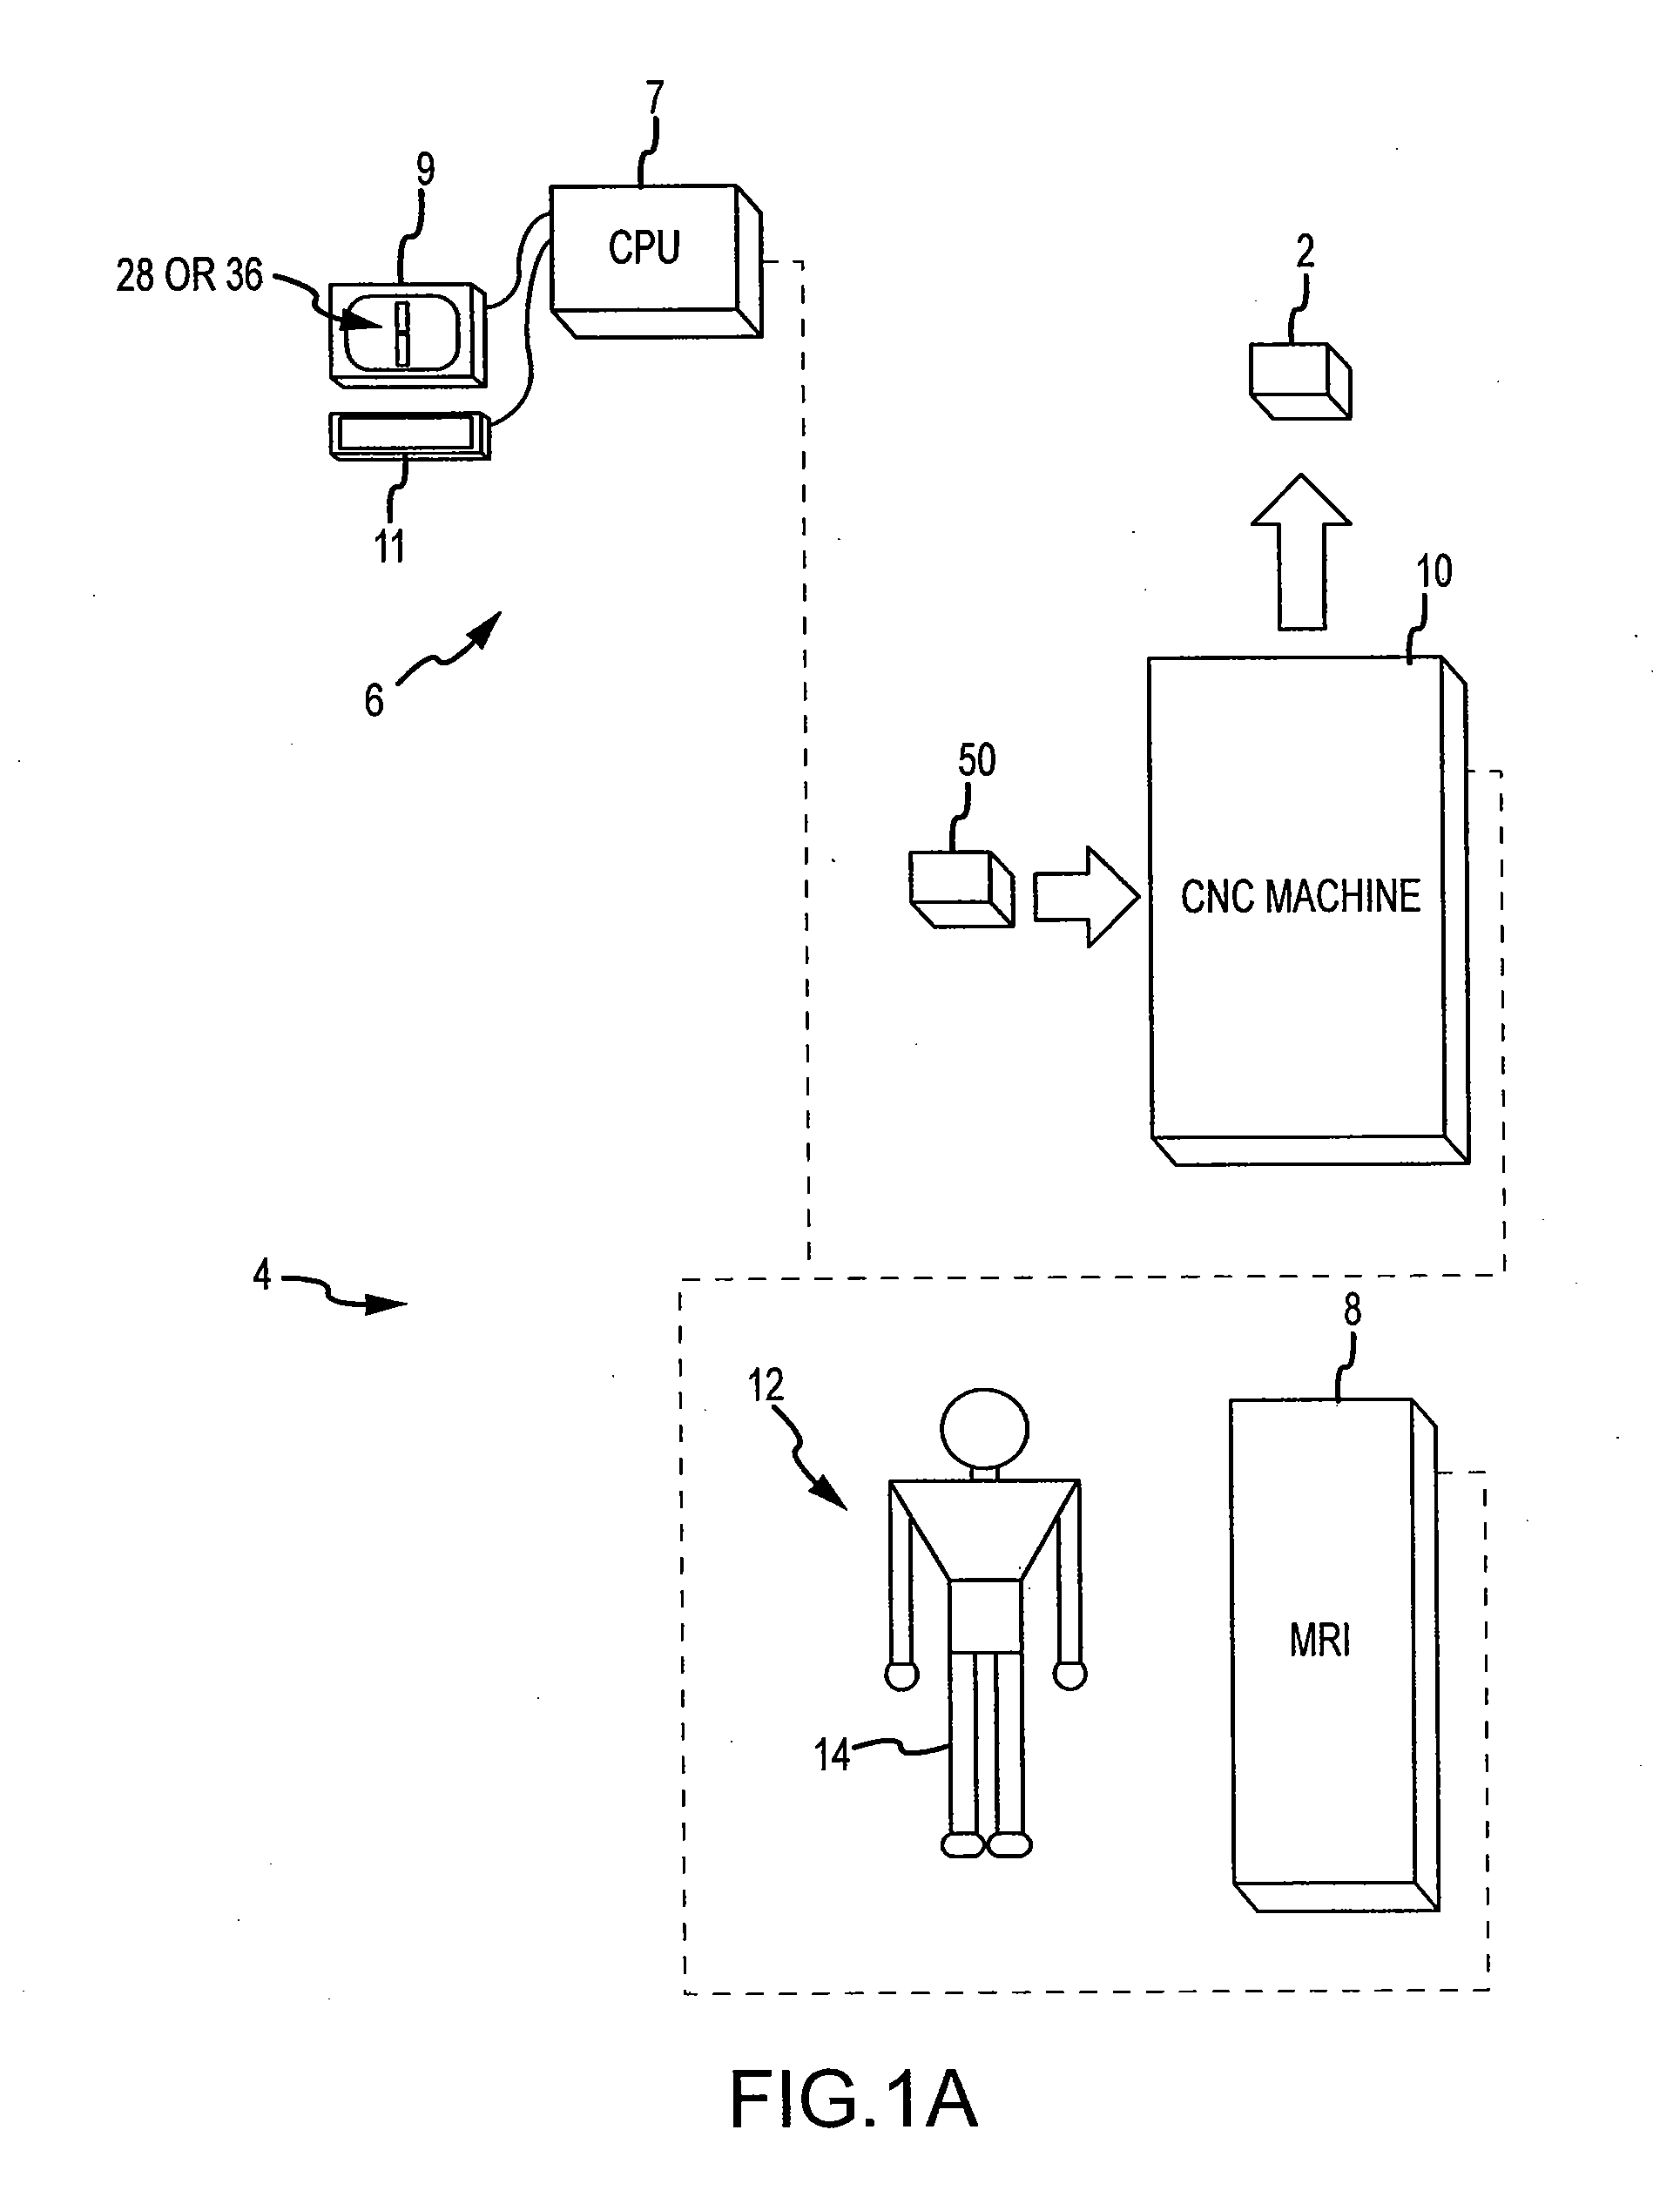 Arthroplasty system and related methods